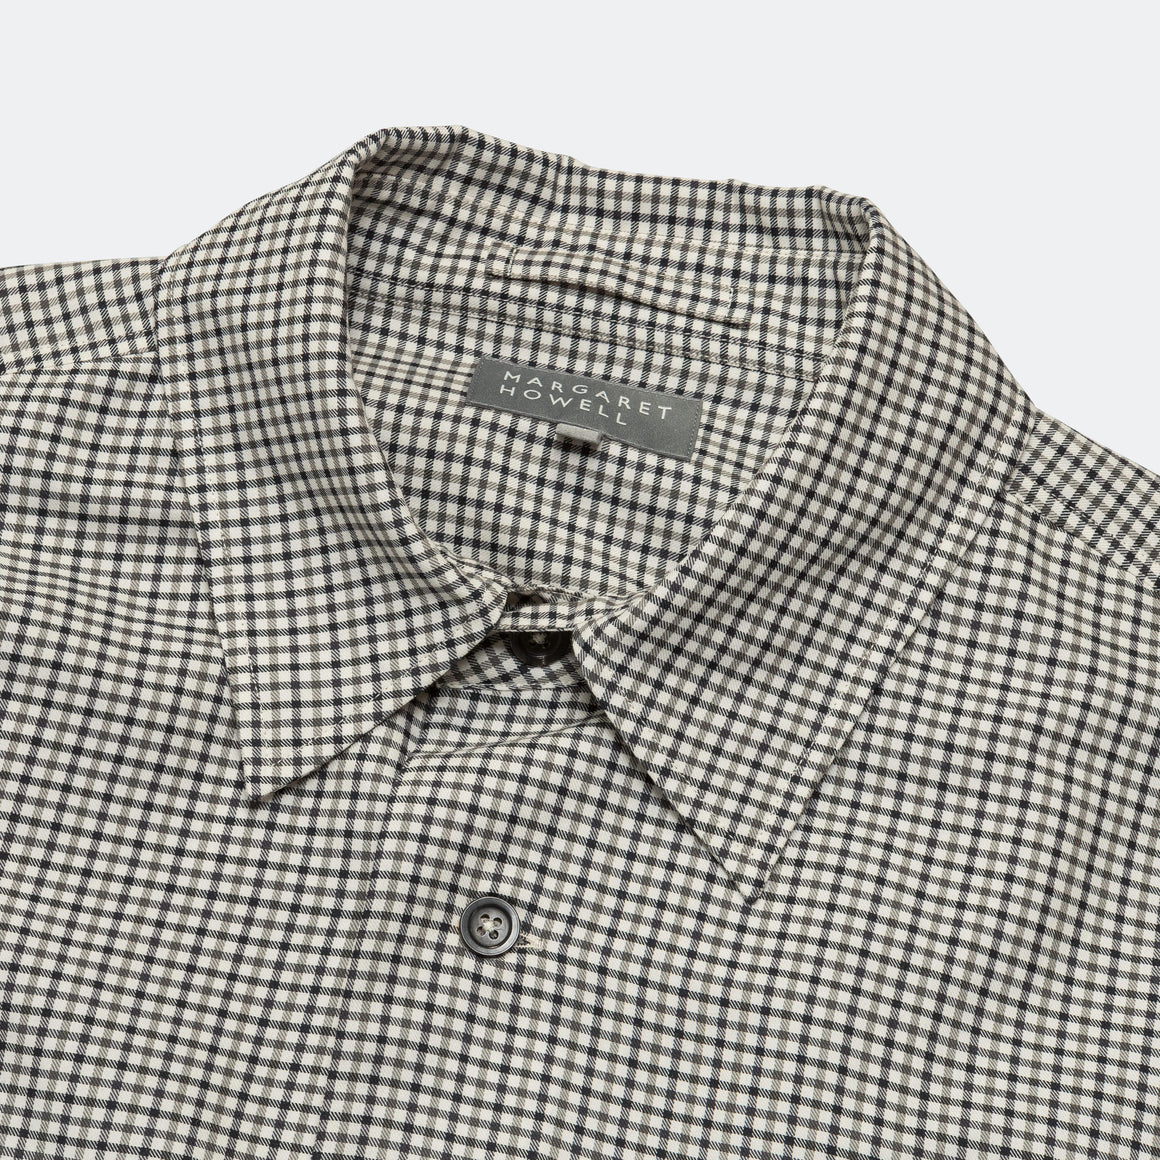 Two Pocket Shirt - Charcoal/Off White Gingham